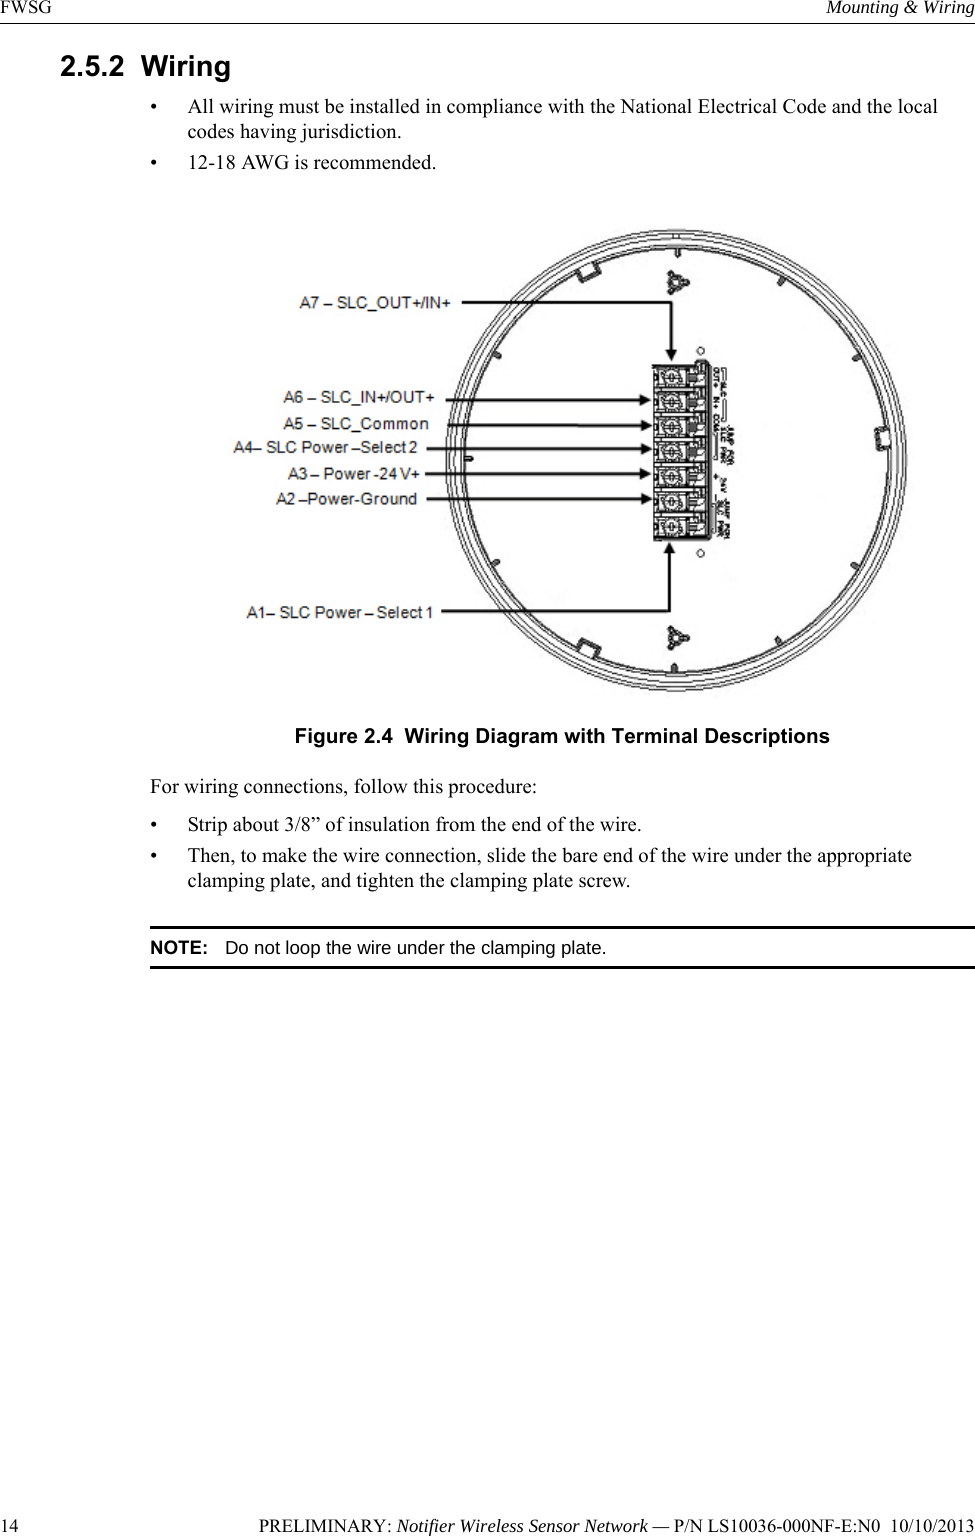 14 PRELIMINARY: Notifier Wireless Sensor Network — P/N LS10036-000NF-E:N0  10/10/2013FWSG Mounting &amp; Wiring2.5.2  Wiring• All wiring must be installed in compliance with the National Electrical Code and the local codes having jurisdiction.• 12-18 AWG is recommended. Figure 2.4  Wiring Diagram with Terminal DescriptionsFor wiring connections, follow this procedure:• Strip about 3/8” of insulation from the end of the wire. • Then, to make the wire connection, slide the bare end of the wire under the appropriate clamping plate, and tighten the clamping plate screw. NOTE: Do not loop the wire under the clamping plate.